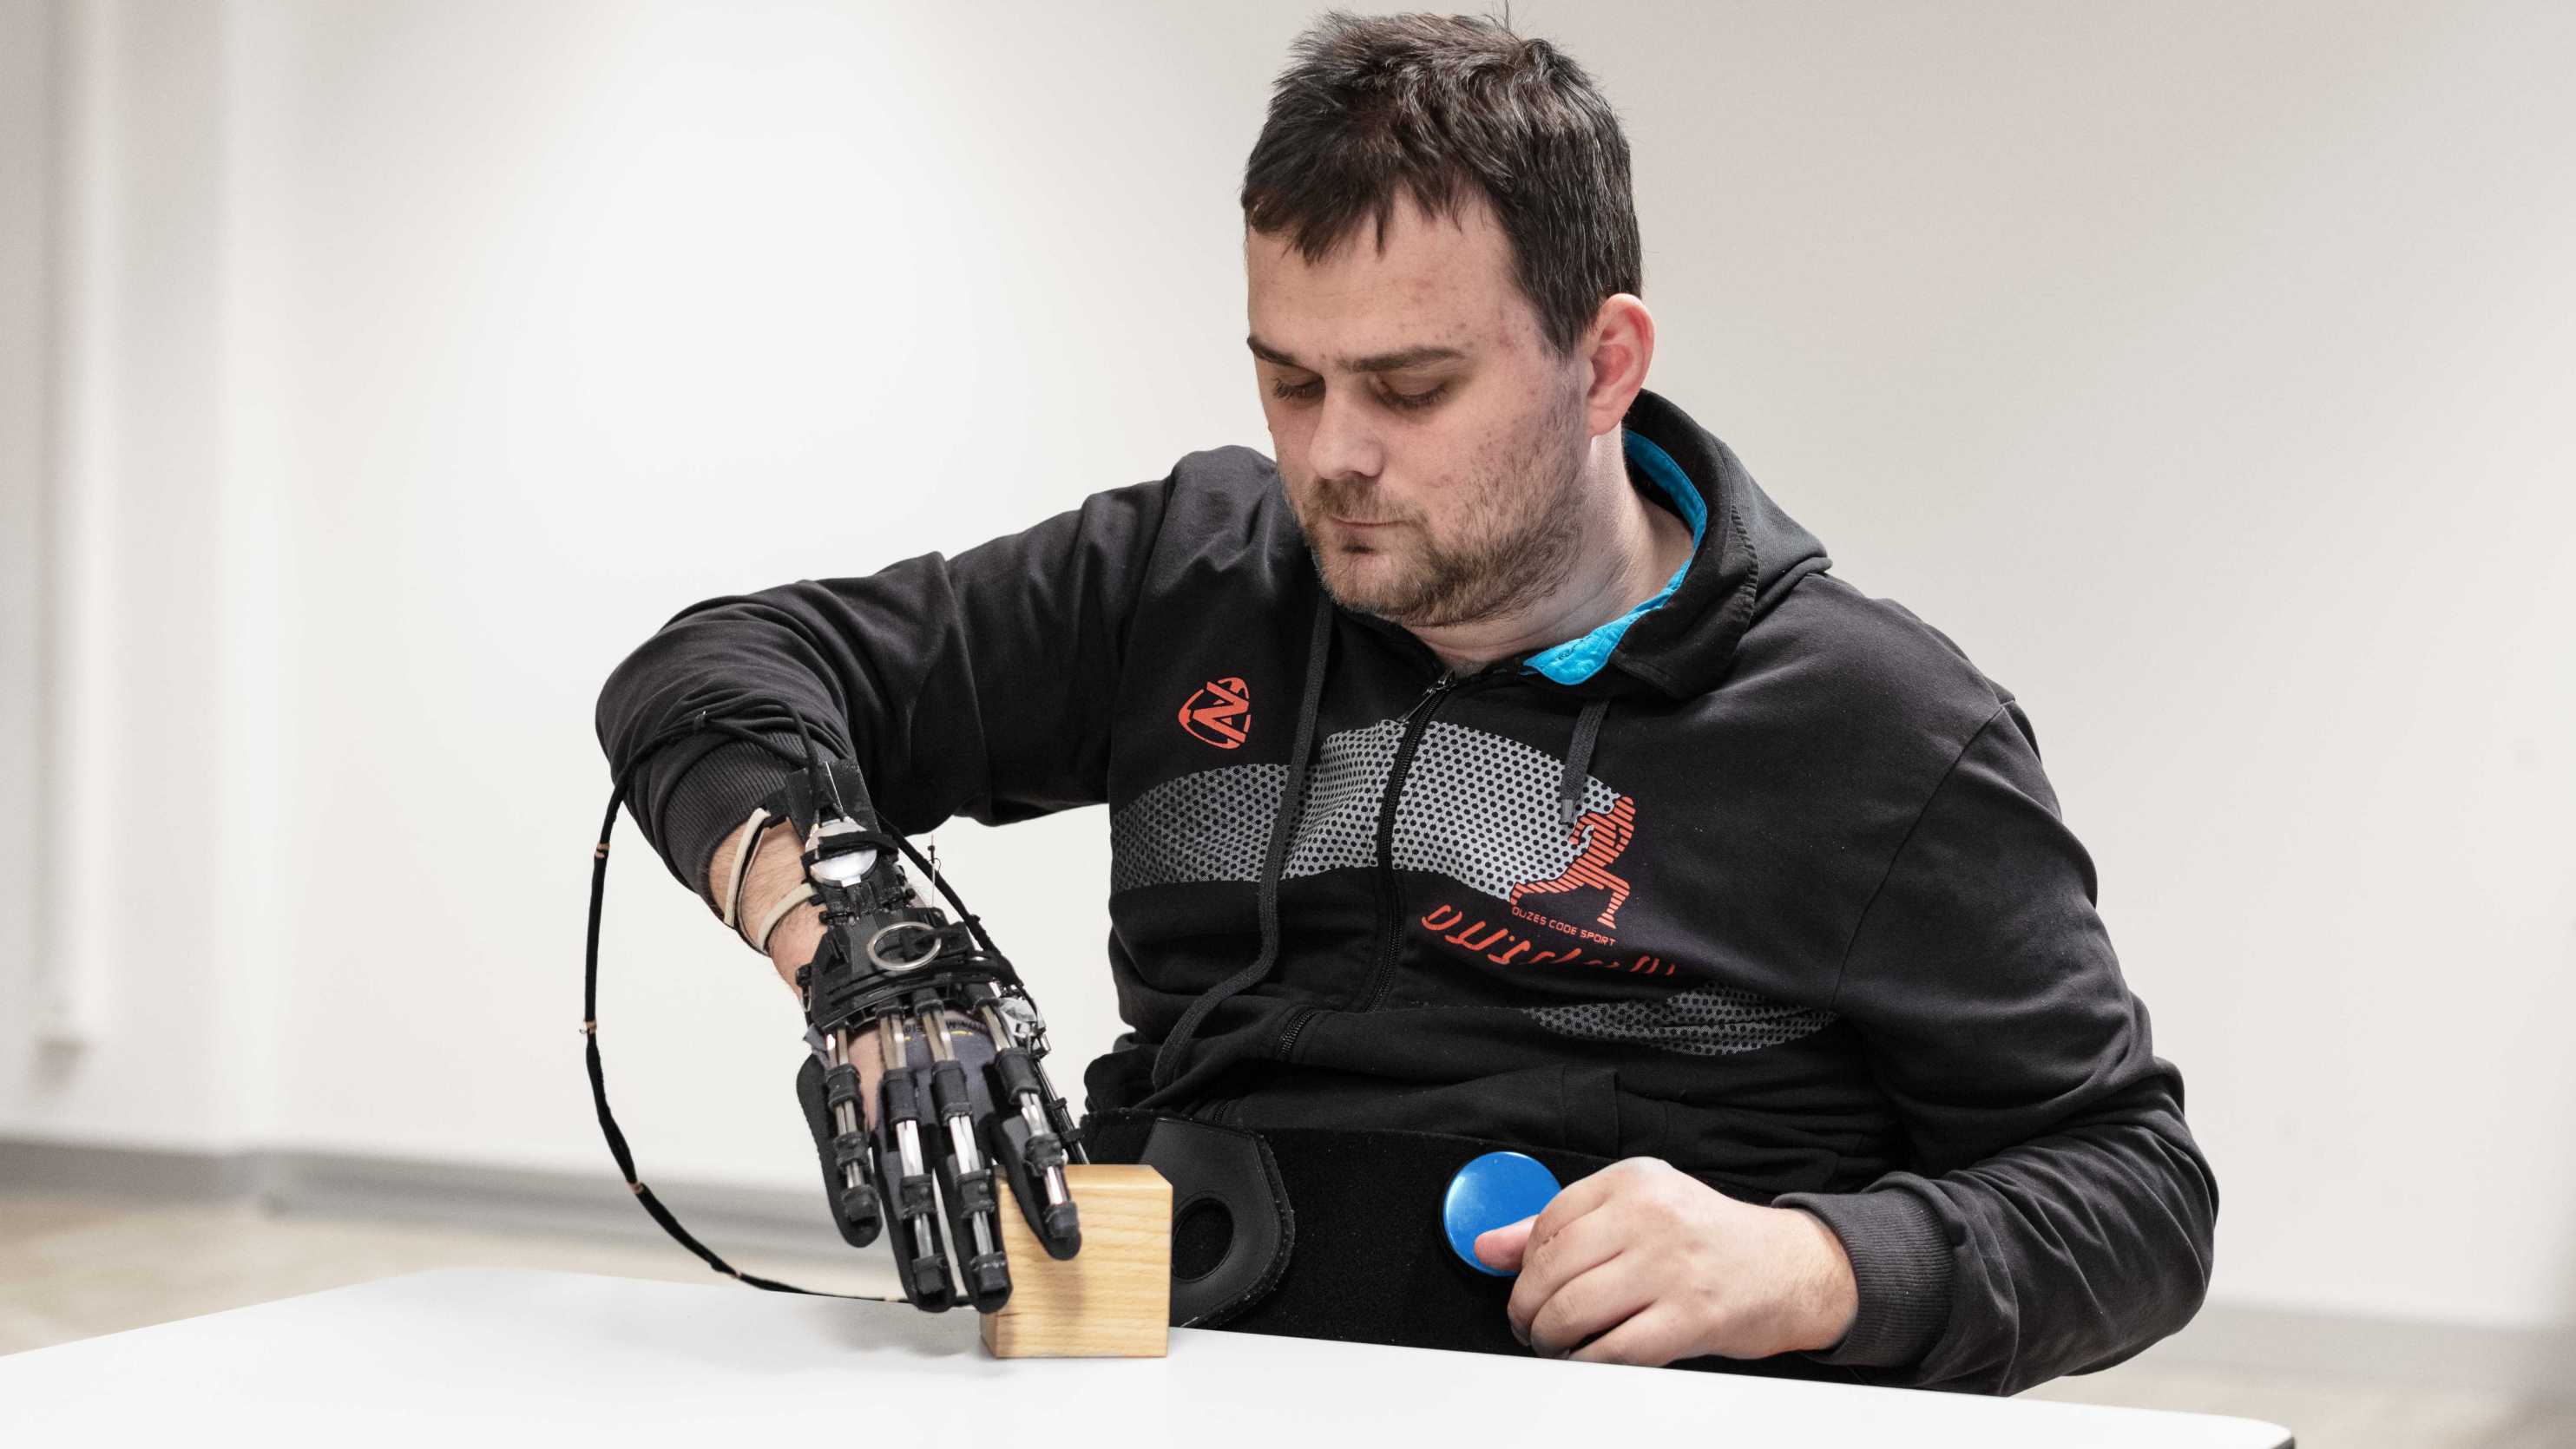 Enlarged view: Person with a hand exoskeleton grasping and lifting a wooden block